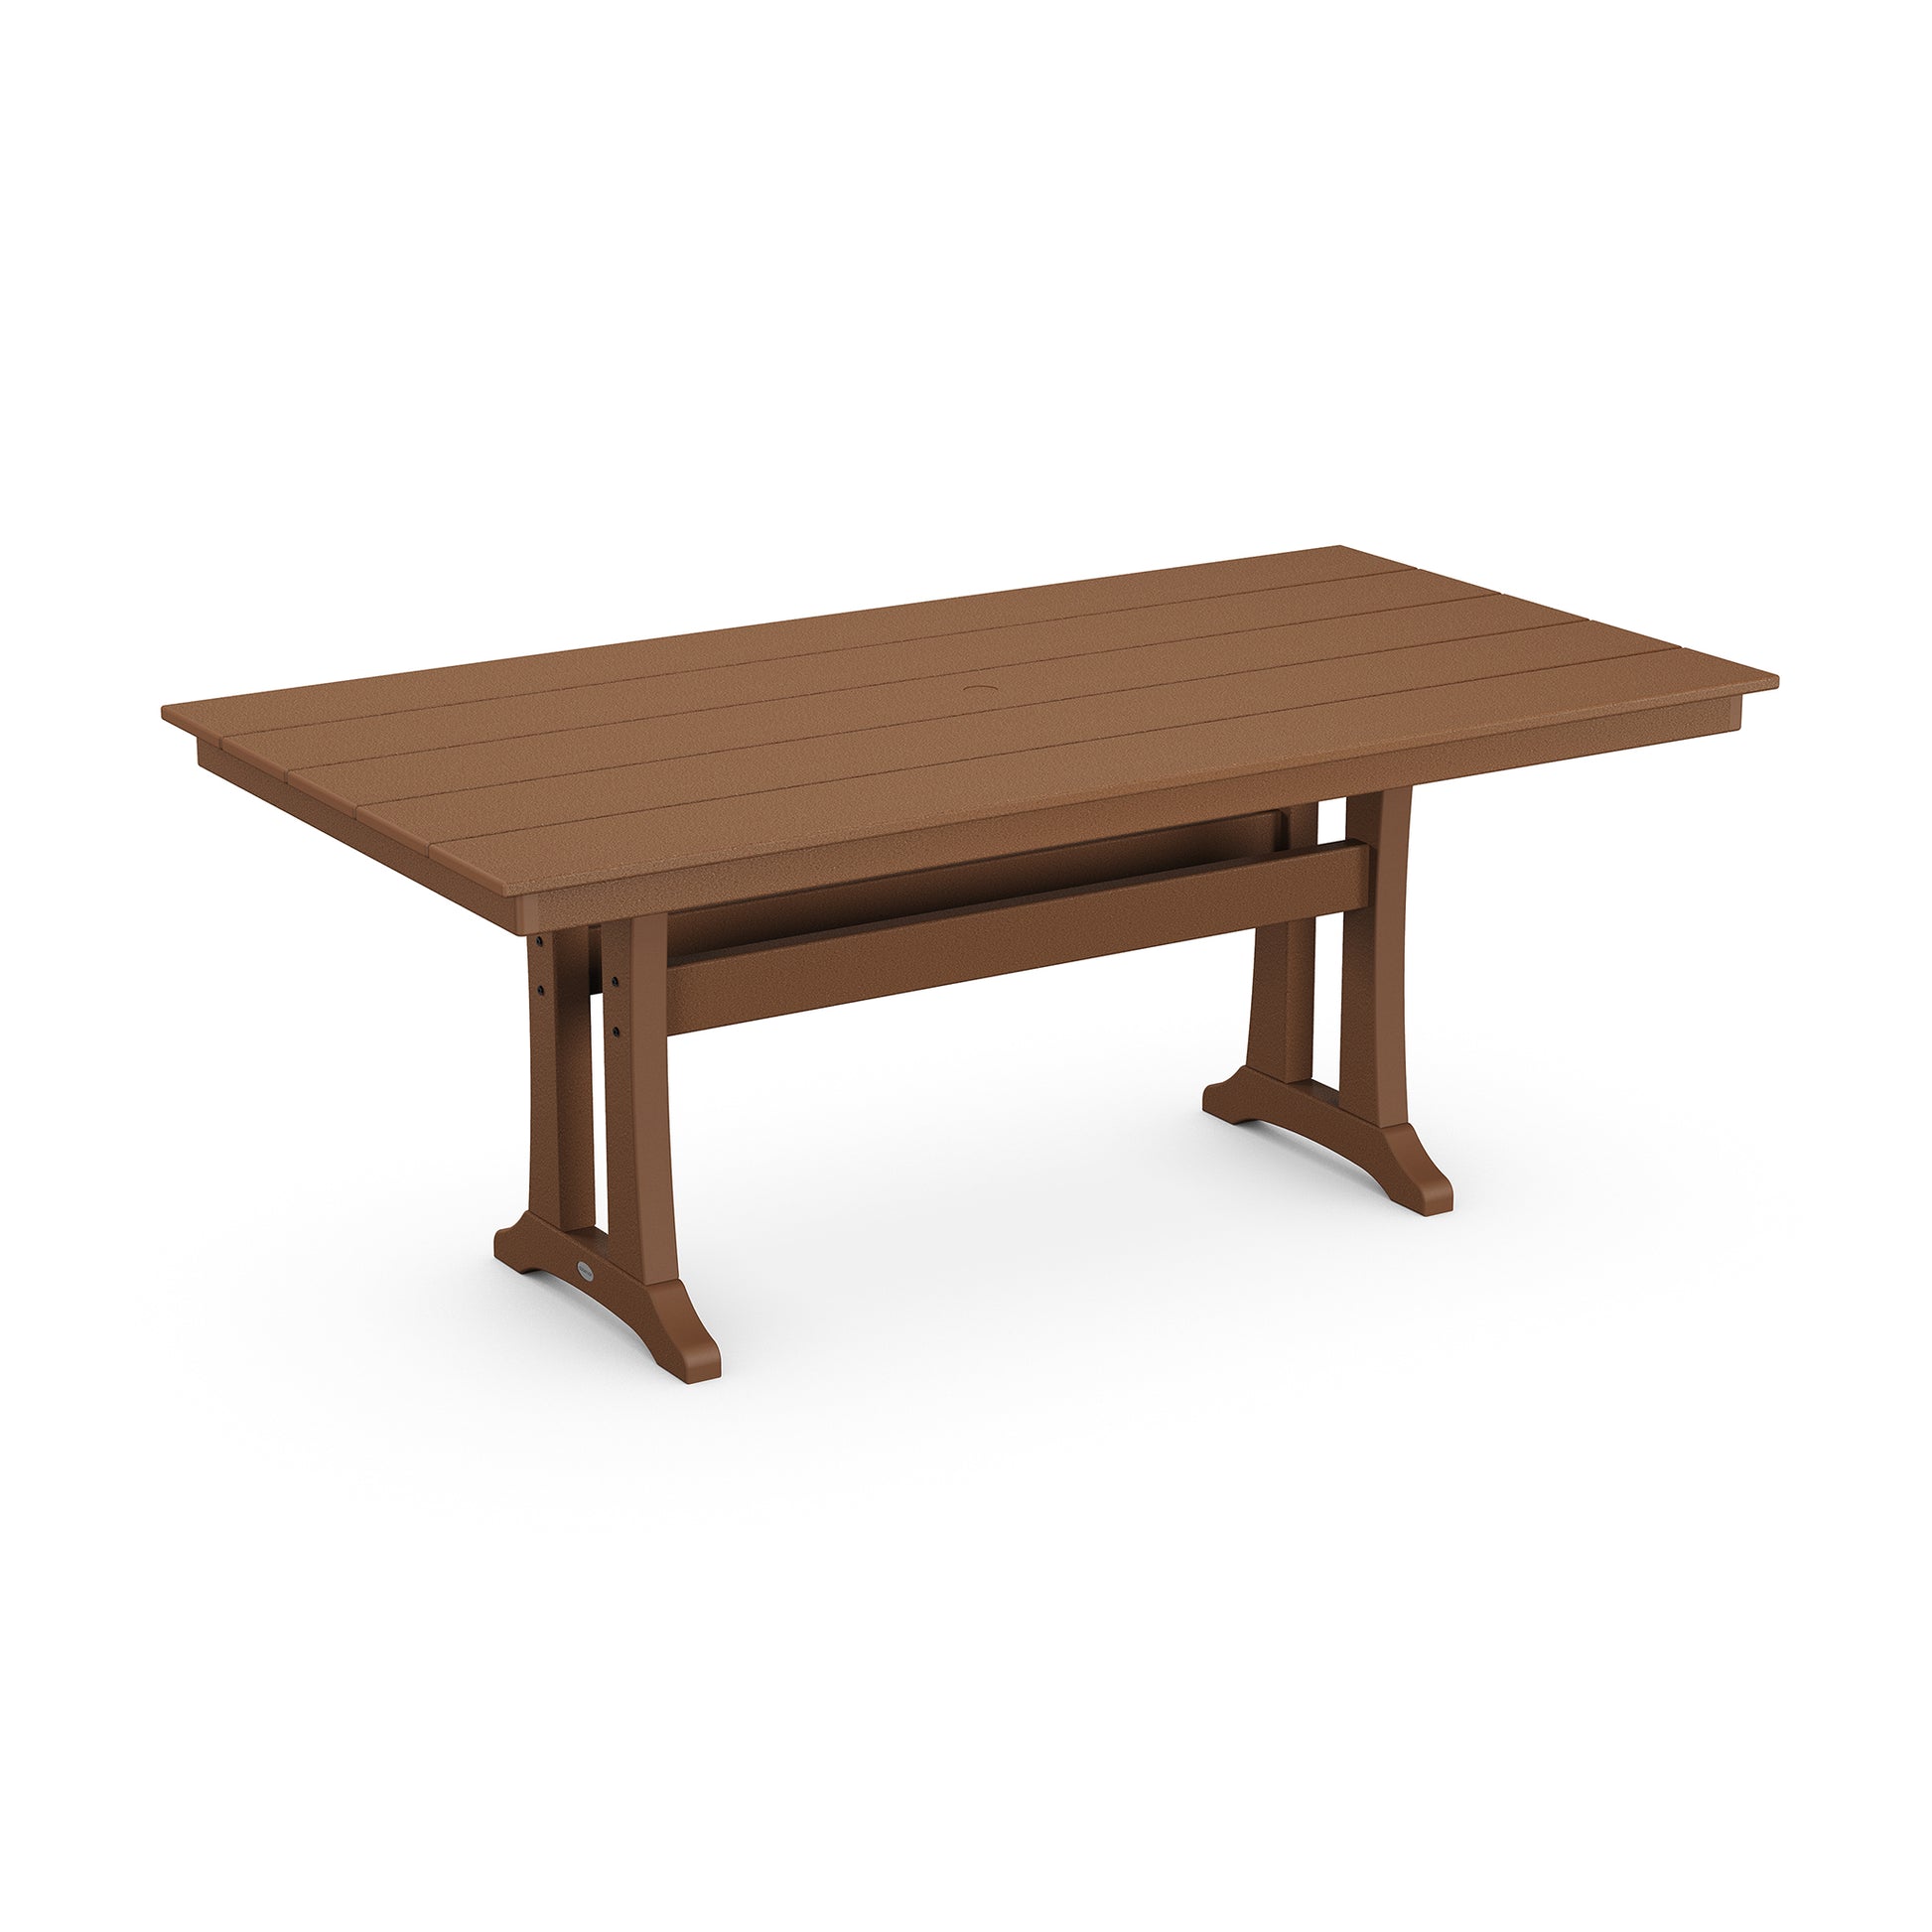 A 3D rendering of a large, rectangular POLYWOOD® Farmhouse Trestle 37" x 72" dining table with sturdy legs, displayed against a plain white background.